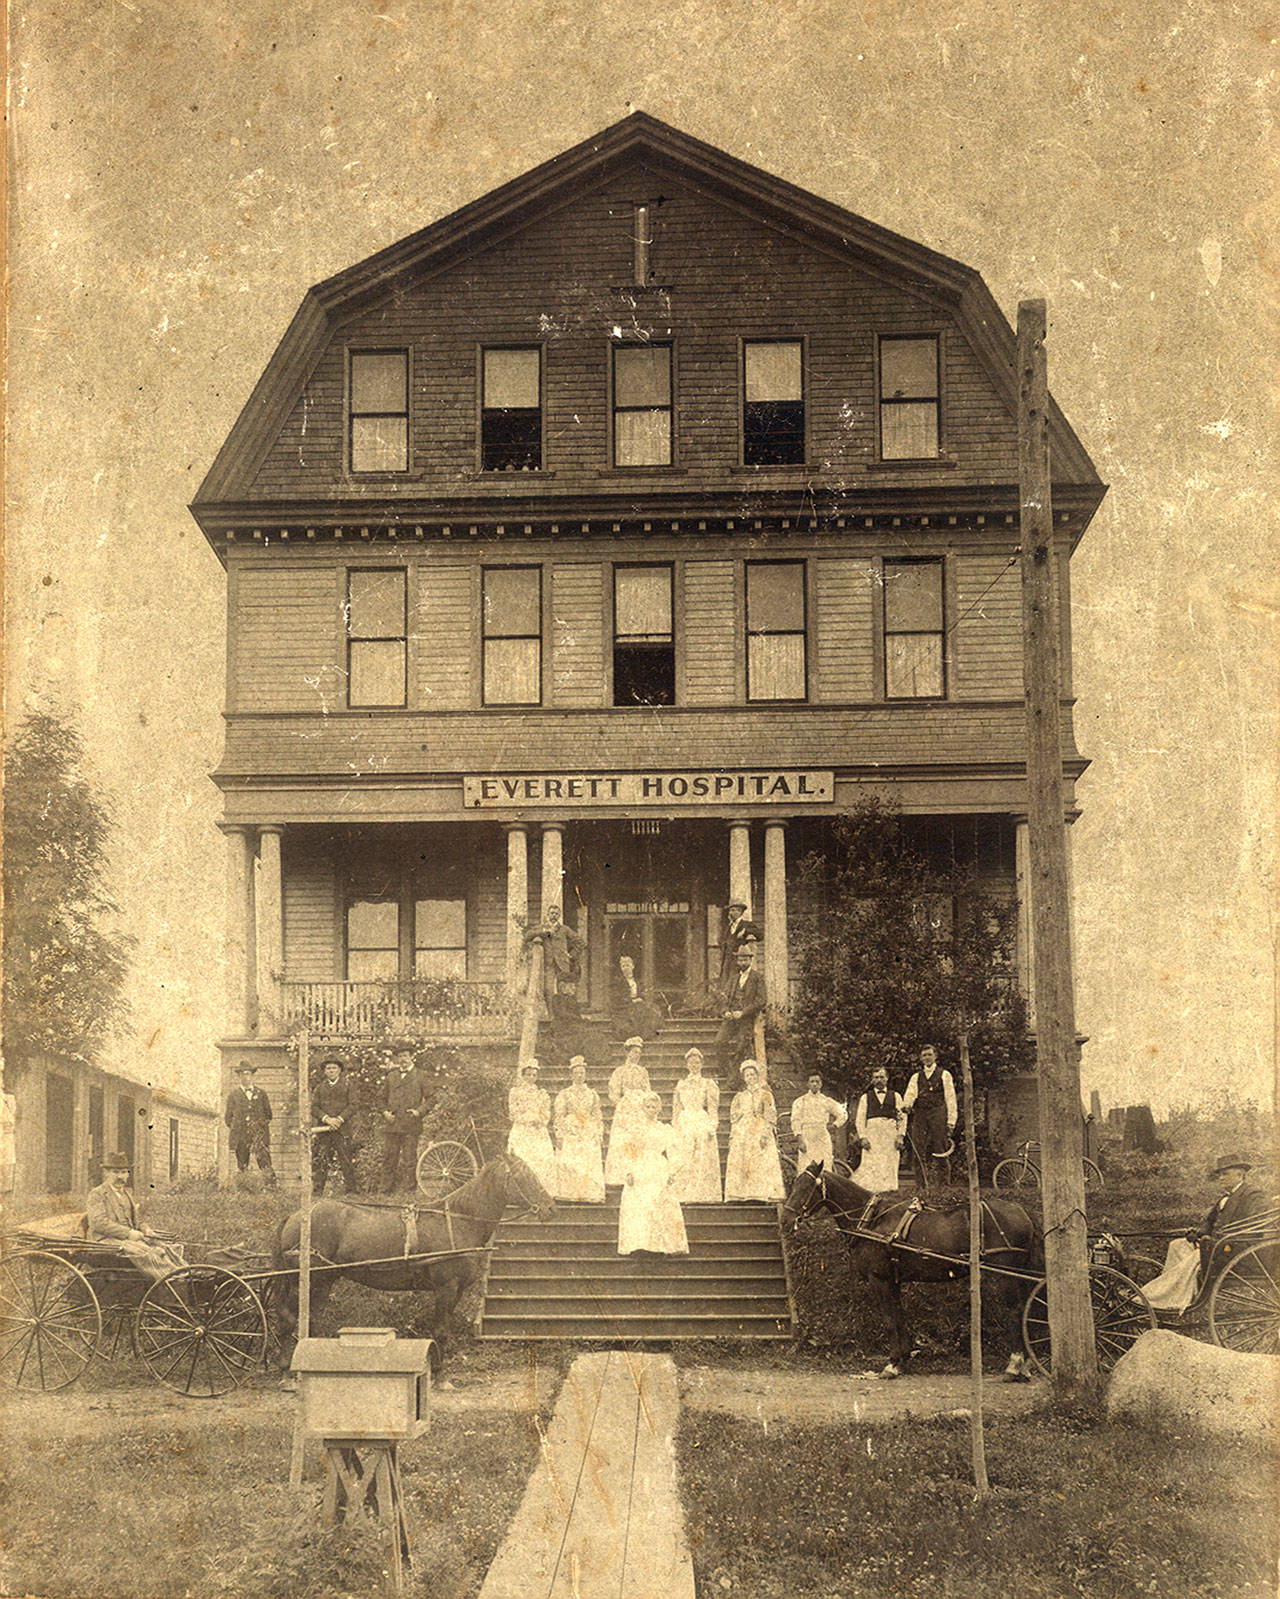 Everett’s first hospital circa 1900. In the two buggies are Dr. Cox and Dr. Hathaway, two of the city’s early practitioners. (Everett Public Library)